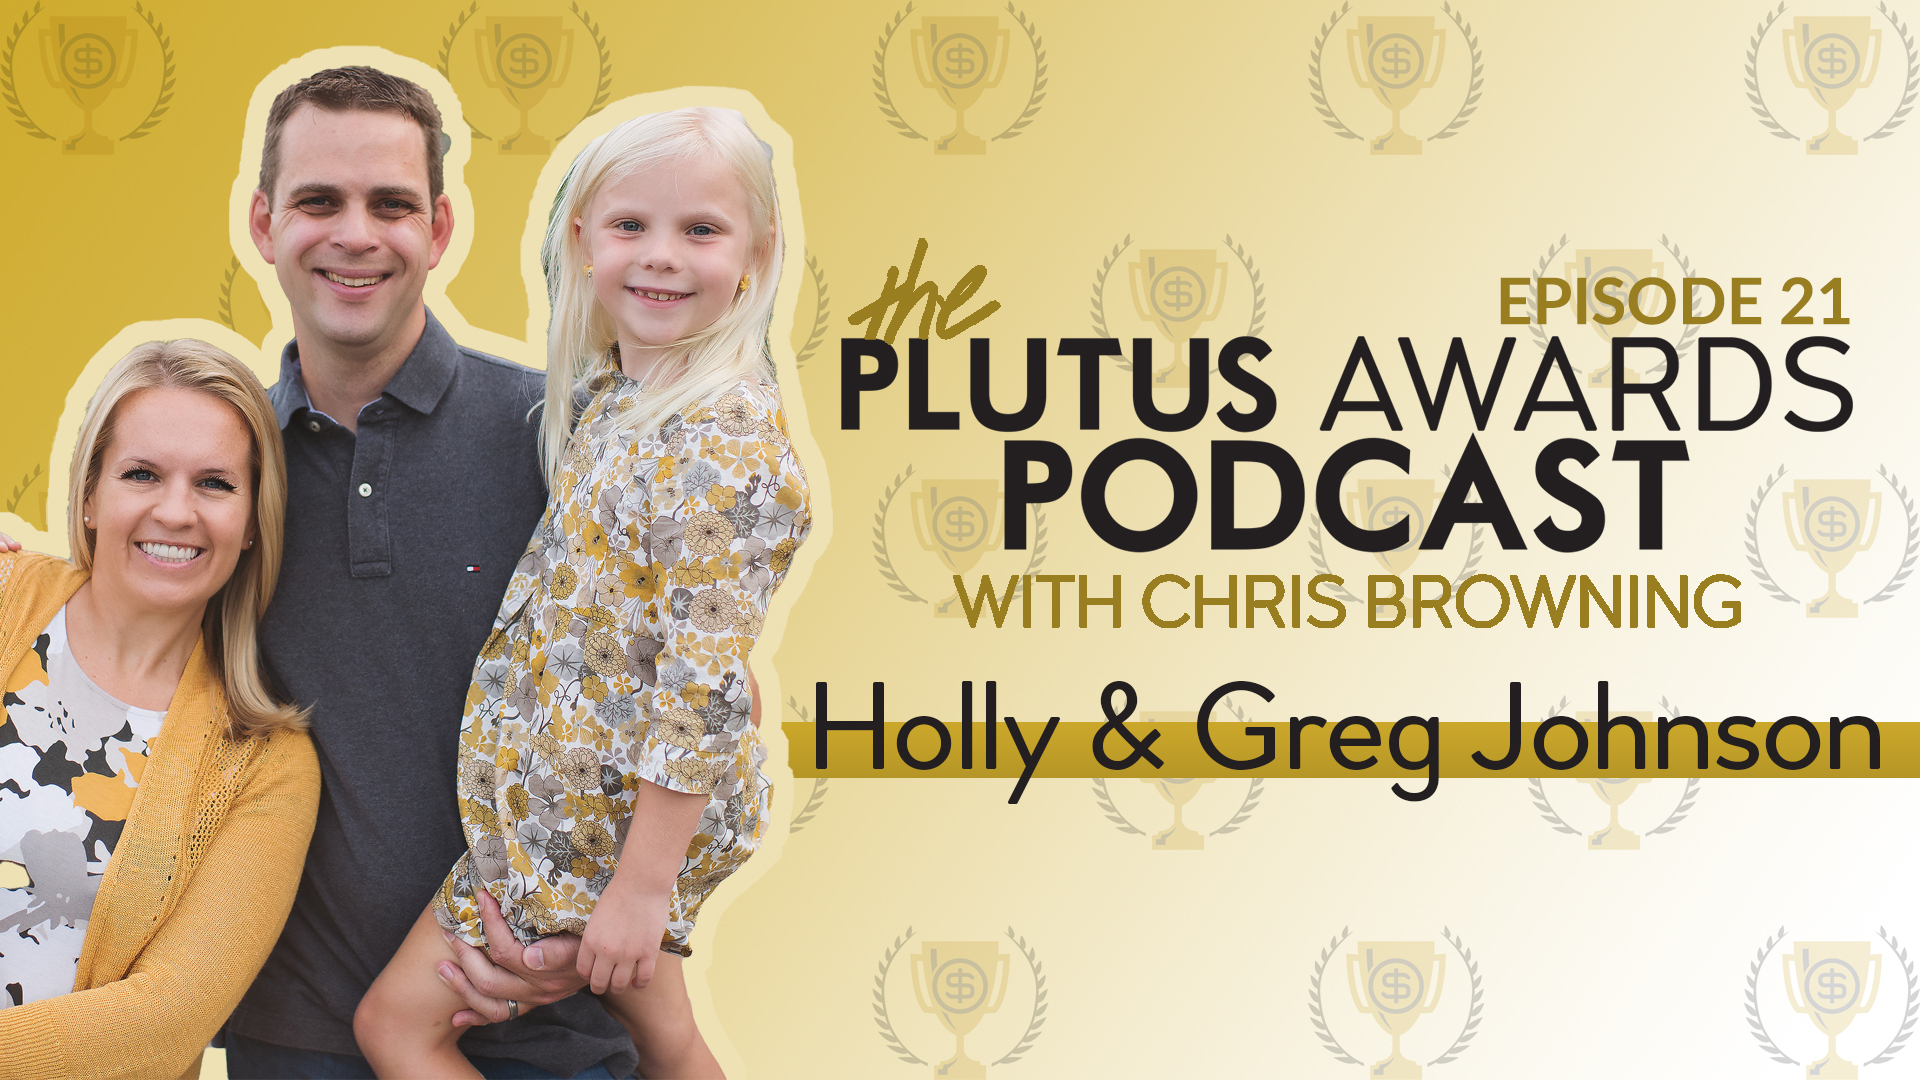 Holly and Greg Johnson - Plutus Awards Podcast Featured Image